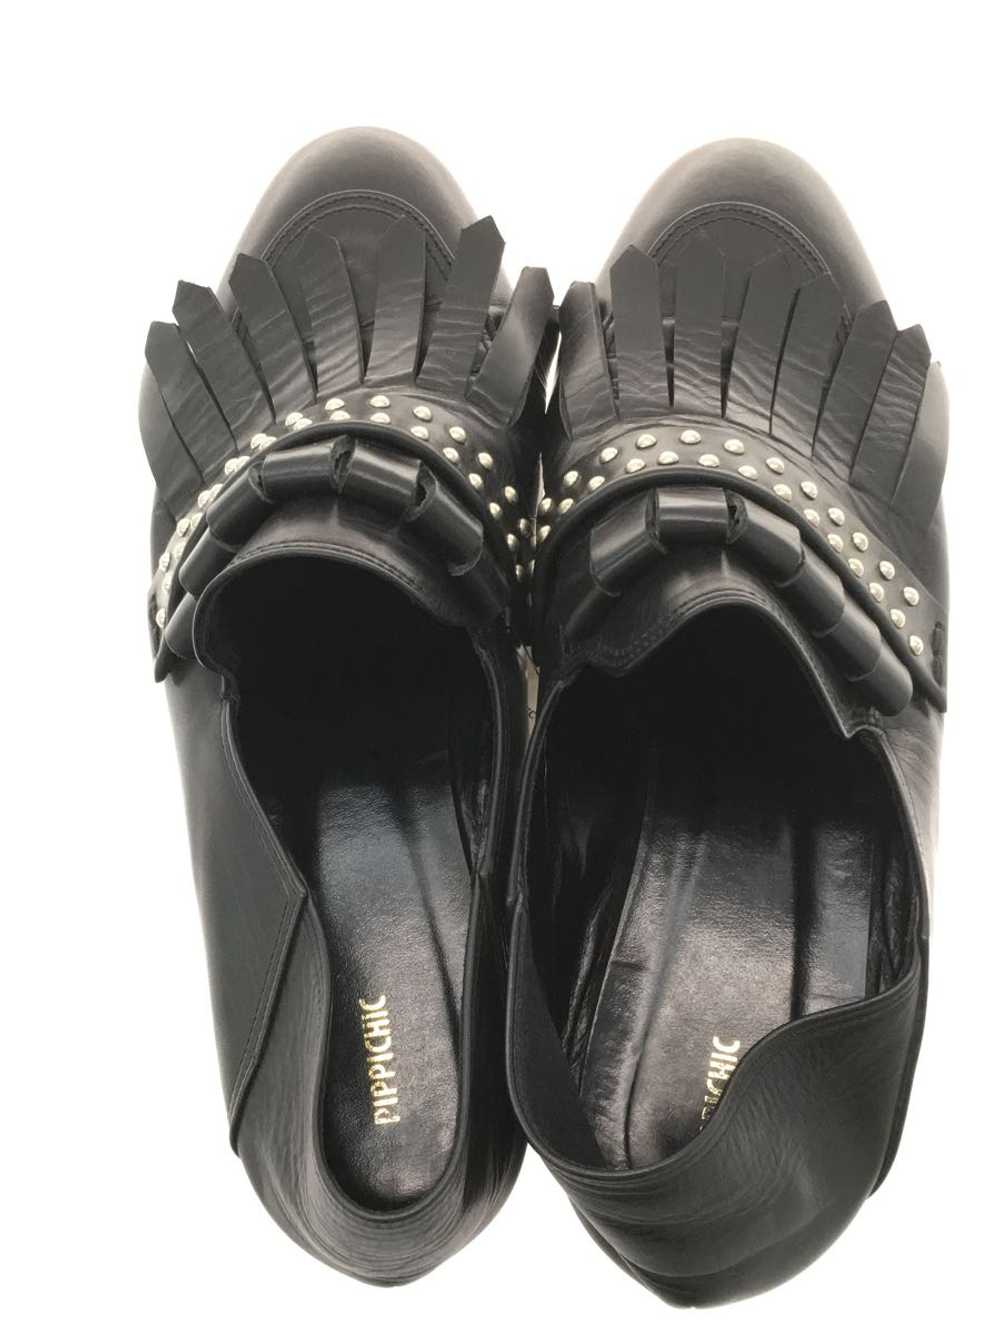 Pippichic Loafers/40/Blk/Leather Shoes BiX93 - image 3